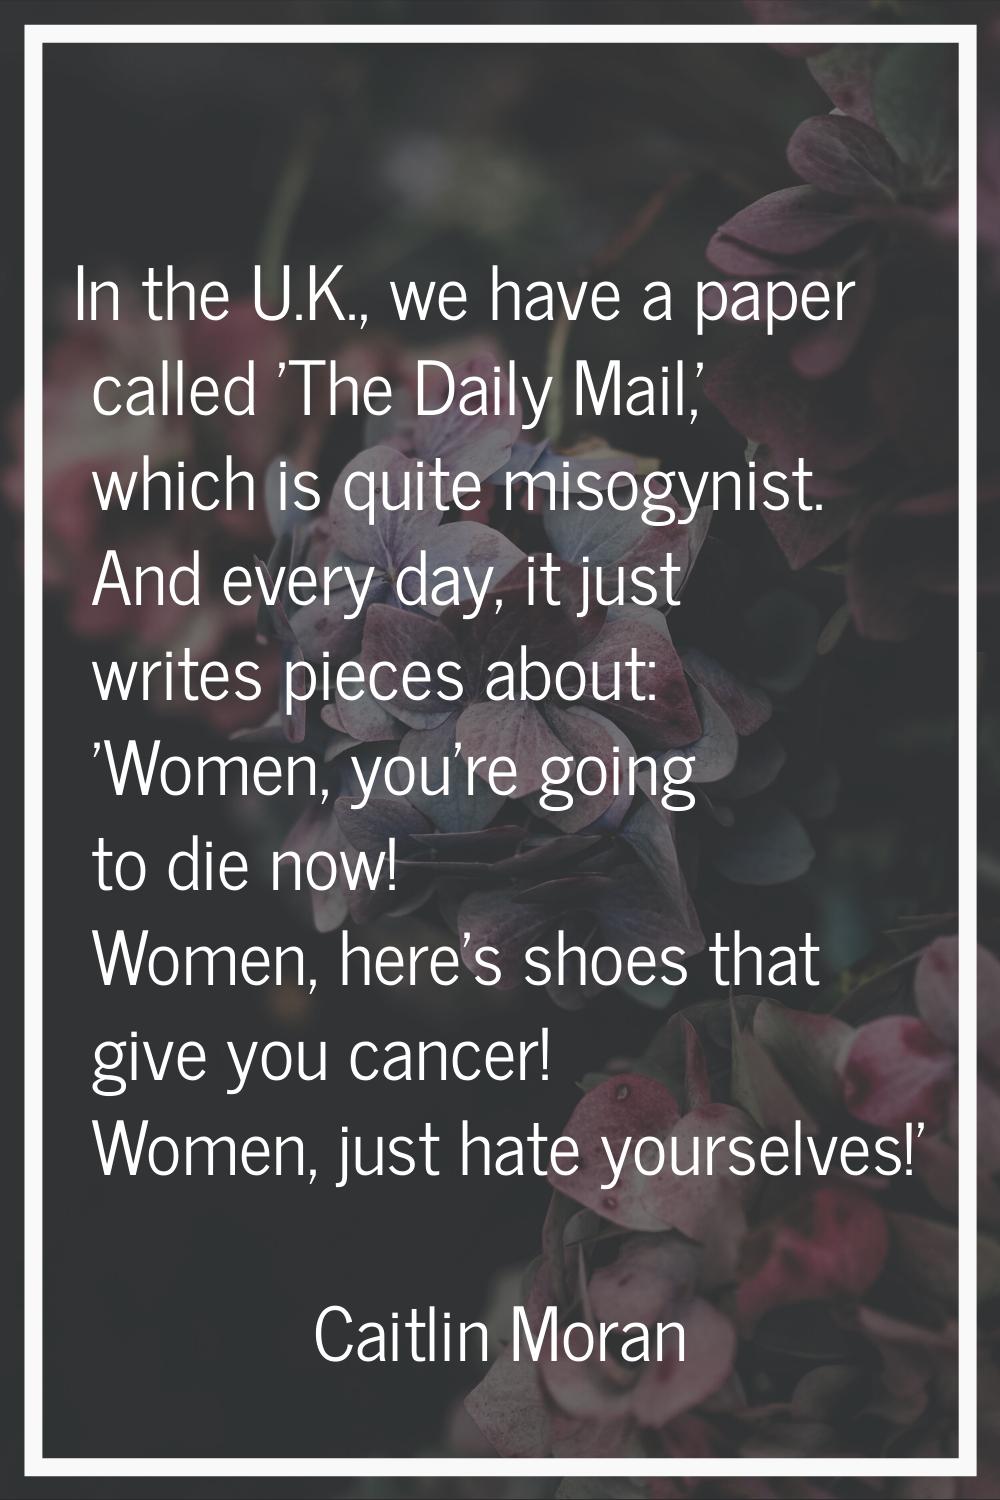 In the U.K., we have a paper called 'The Daily Mail,' which is quite misogynist. And every day, it 